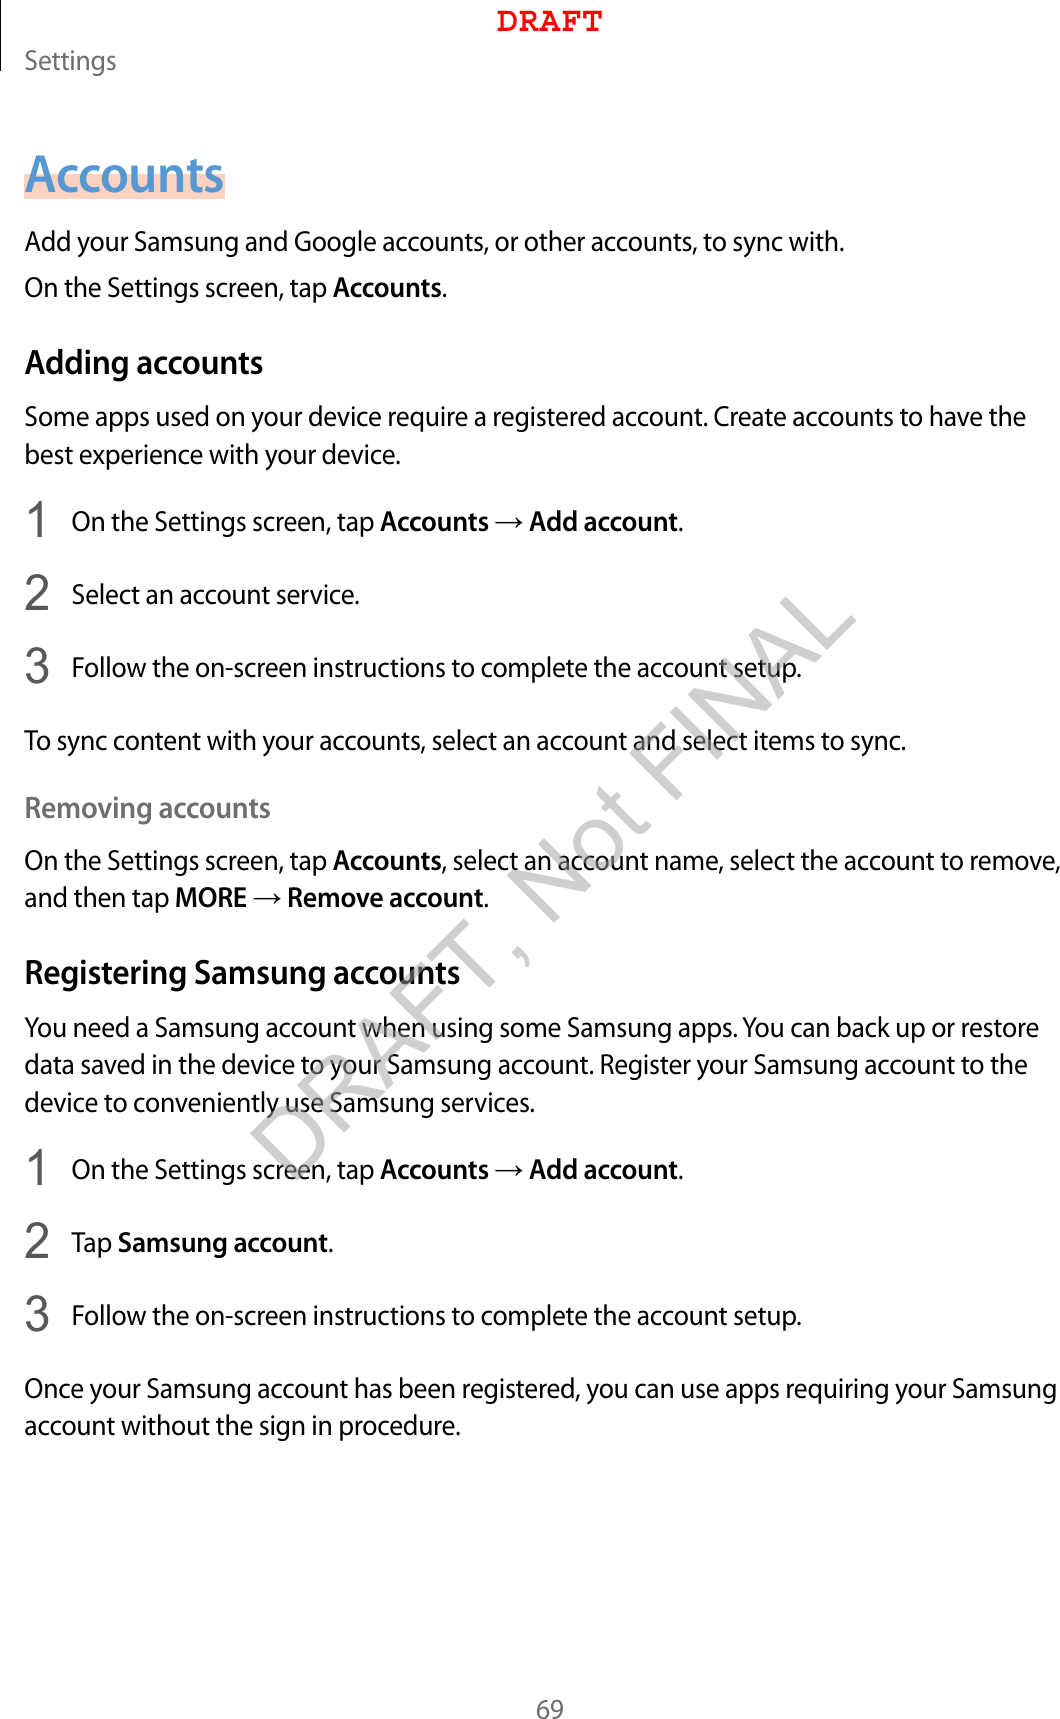 Settings69AccountsAdd your Samsung and Google accounts, or other accounts, to sync with.On the Settings screen, tap Accounts.Adding accountsSome apps used on your device require a registered account. Create accounts to have the best experience with your device.1  On the Settings screen, tap Accounts → Add account.2  Select an account service.3  Follow the on-screen instructions to complete the account setup.To sync content with your accounts, select an account and select items to sync.Removing accountsOn the Settings screen, tap Accounts, select an account name, select the account to remove, and then tap MORE → Remove account.Registering Samsung accountsYou need a Samsung account when using some Samsung apps. You can back up or restore data saved in the device to your Samsung account. Register your Samsung account to the device to conveniently use Samsung services.1  On the Settings screen, tap Accounts → Add account.2  Tap Samsung account.3  Follow the on-screen instructions to complete the account setup.Once your Samsung account has been registered, you can use apps requiring your Samsung account without the sign in procedure.DRAFTDRAFT, Not FINAL